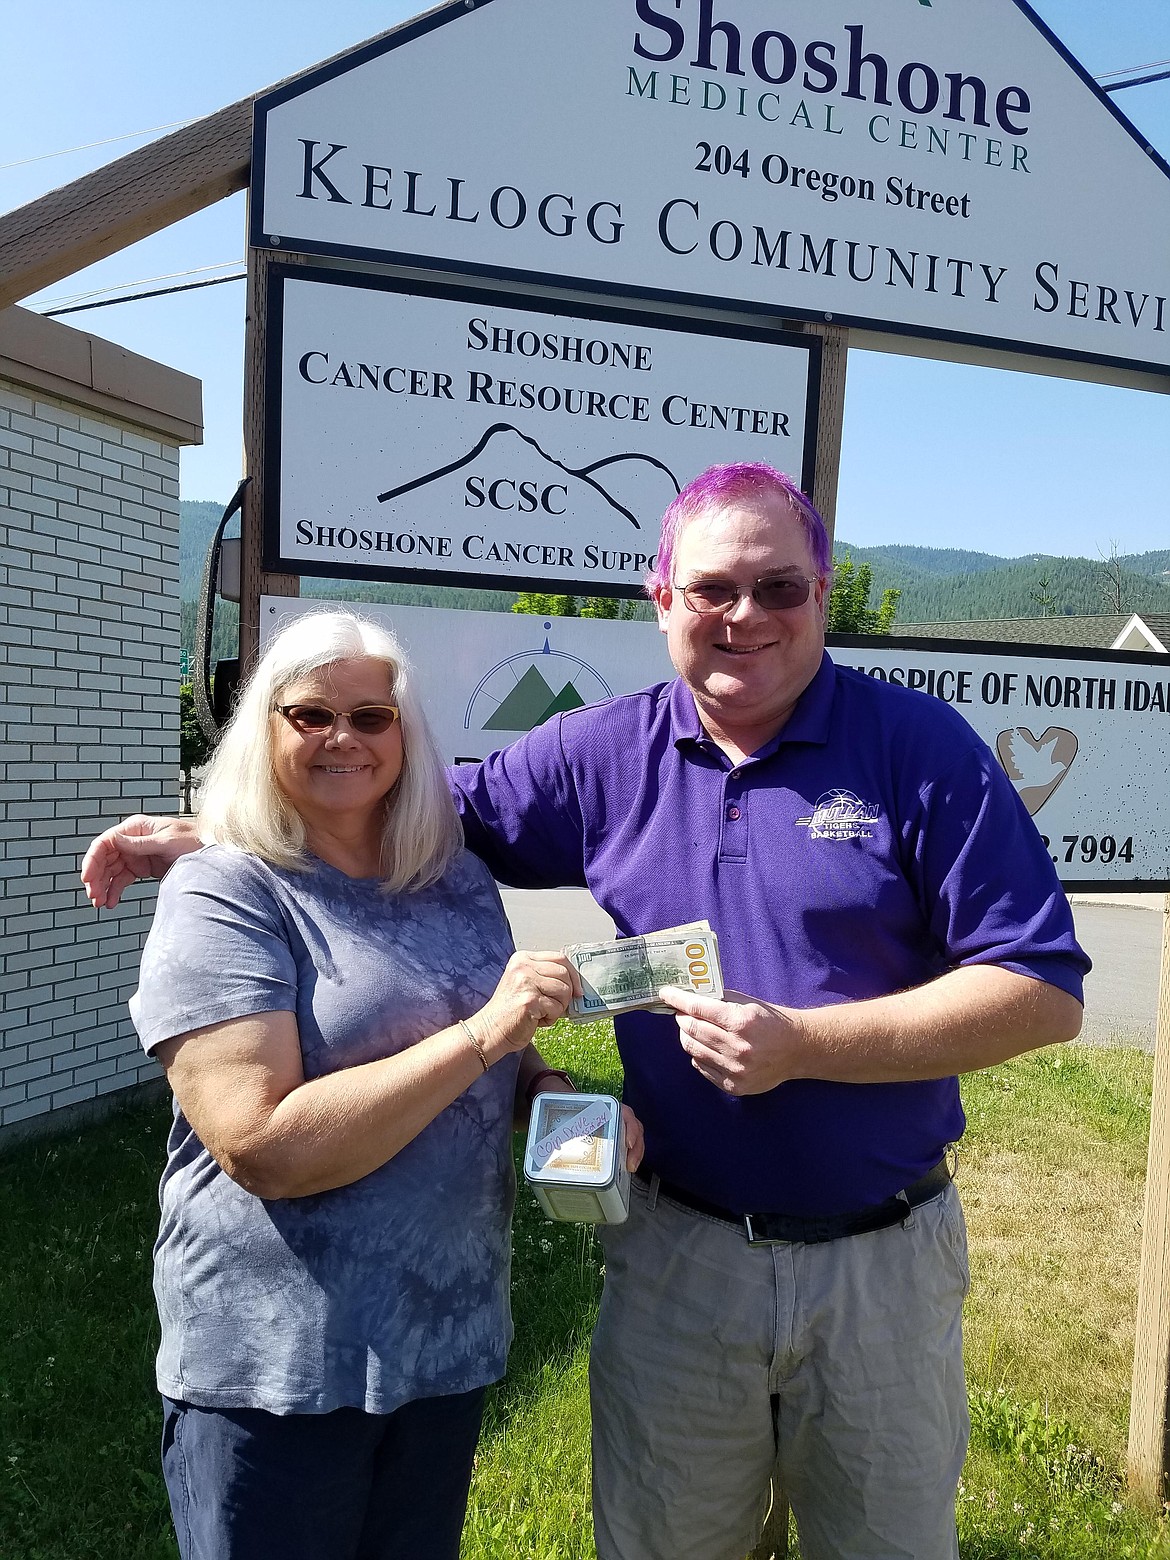 Valerie Jordan of the Shoshone Cancer Resource Center accepts the money from Mullan High School student council advisor and teacher Paul Elston. A total of $618.39 in funds was donated to Shoshone Cancer Resource Center as part of the Mullan High School coin drive.